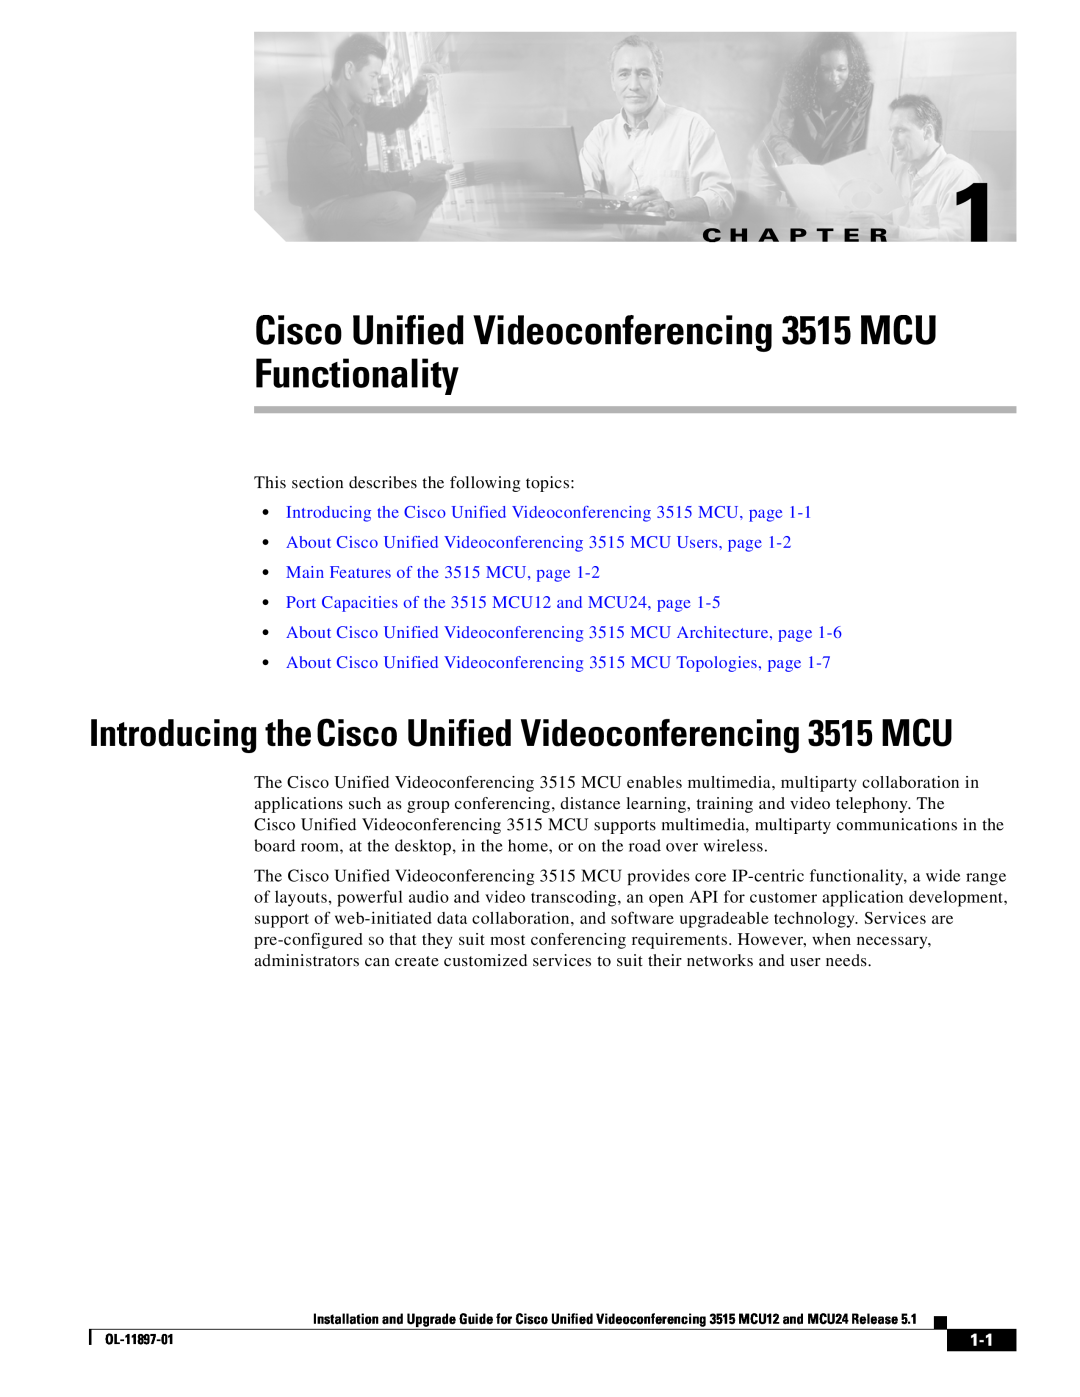 Cisco Systems MCU24 manual Cisco Unified Videoconferencing 3515 MCU Functionality, C H A P T E R 